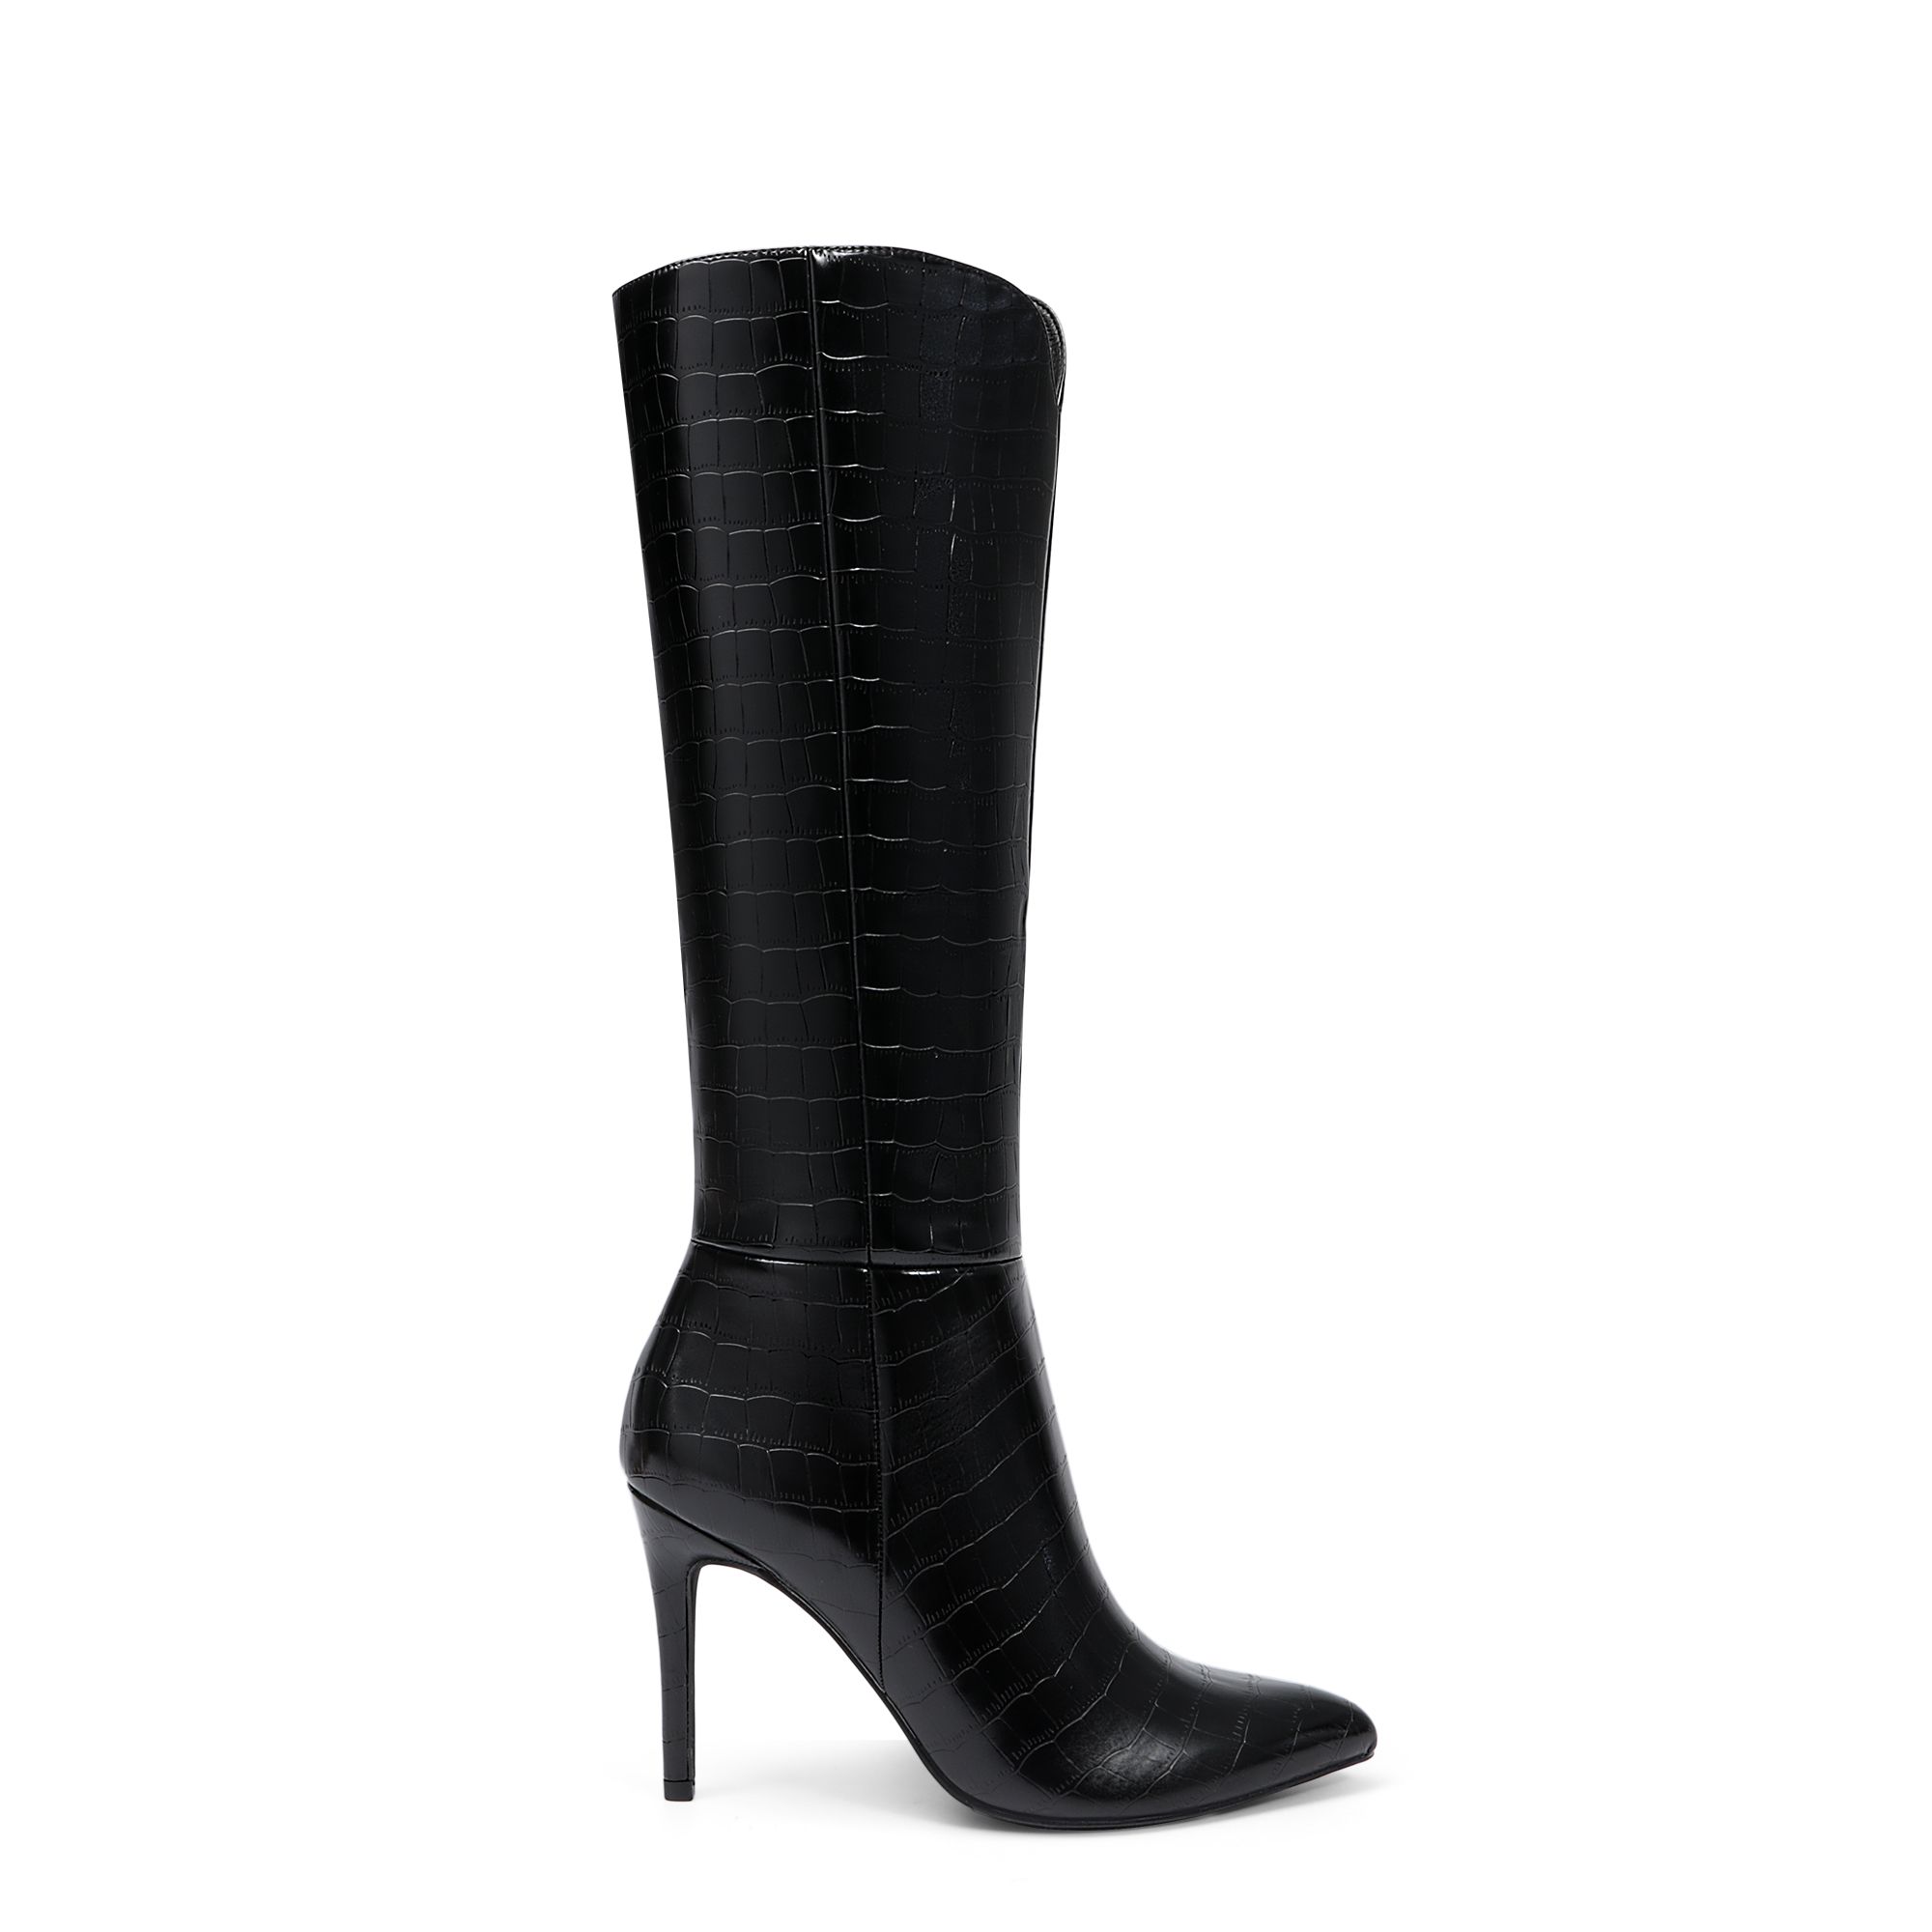 Pointed Toe Stiletto Knee High Boots | Dream Pairs